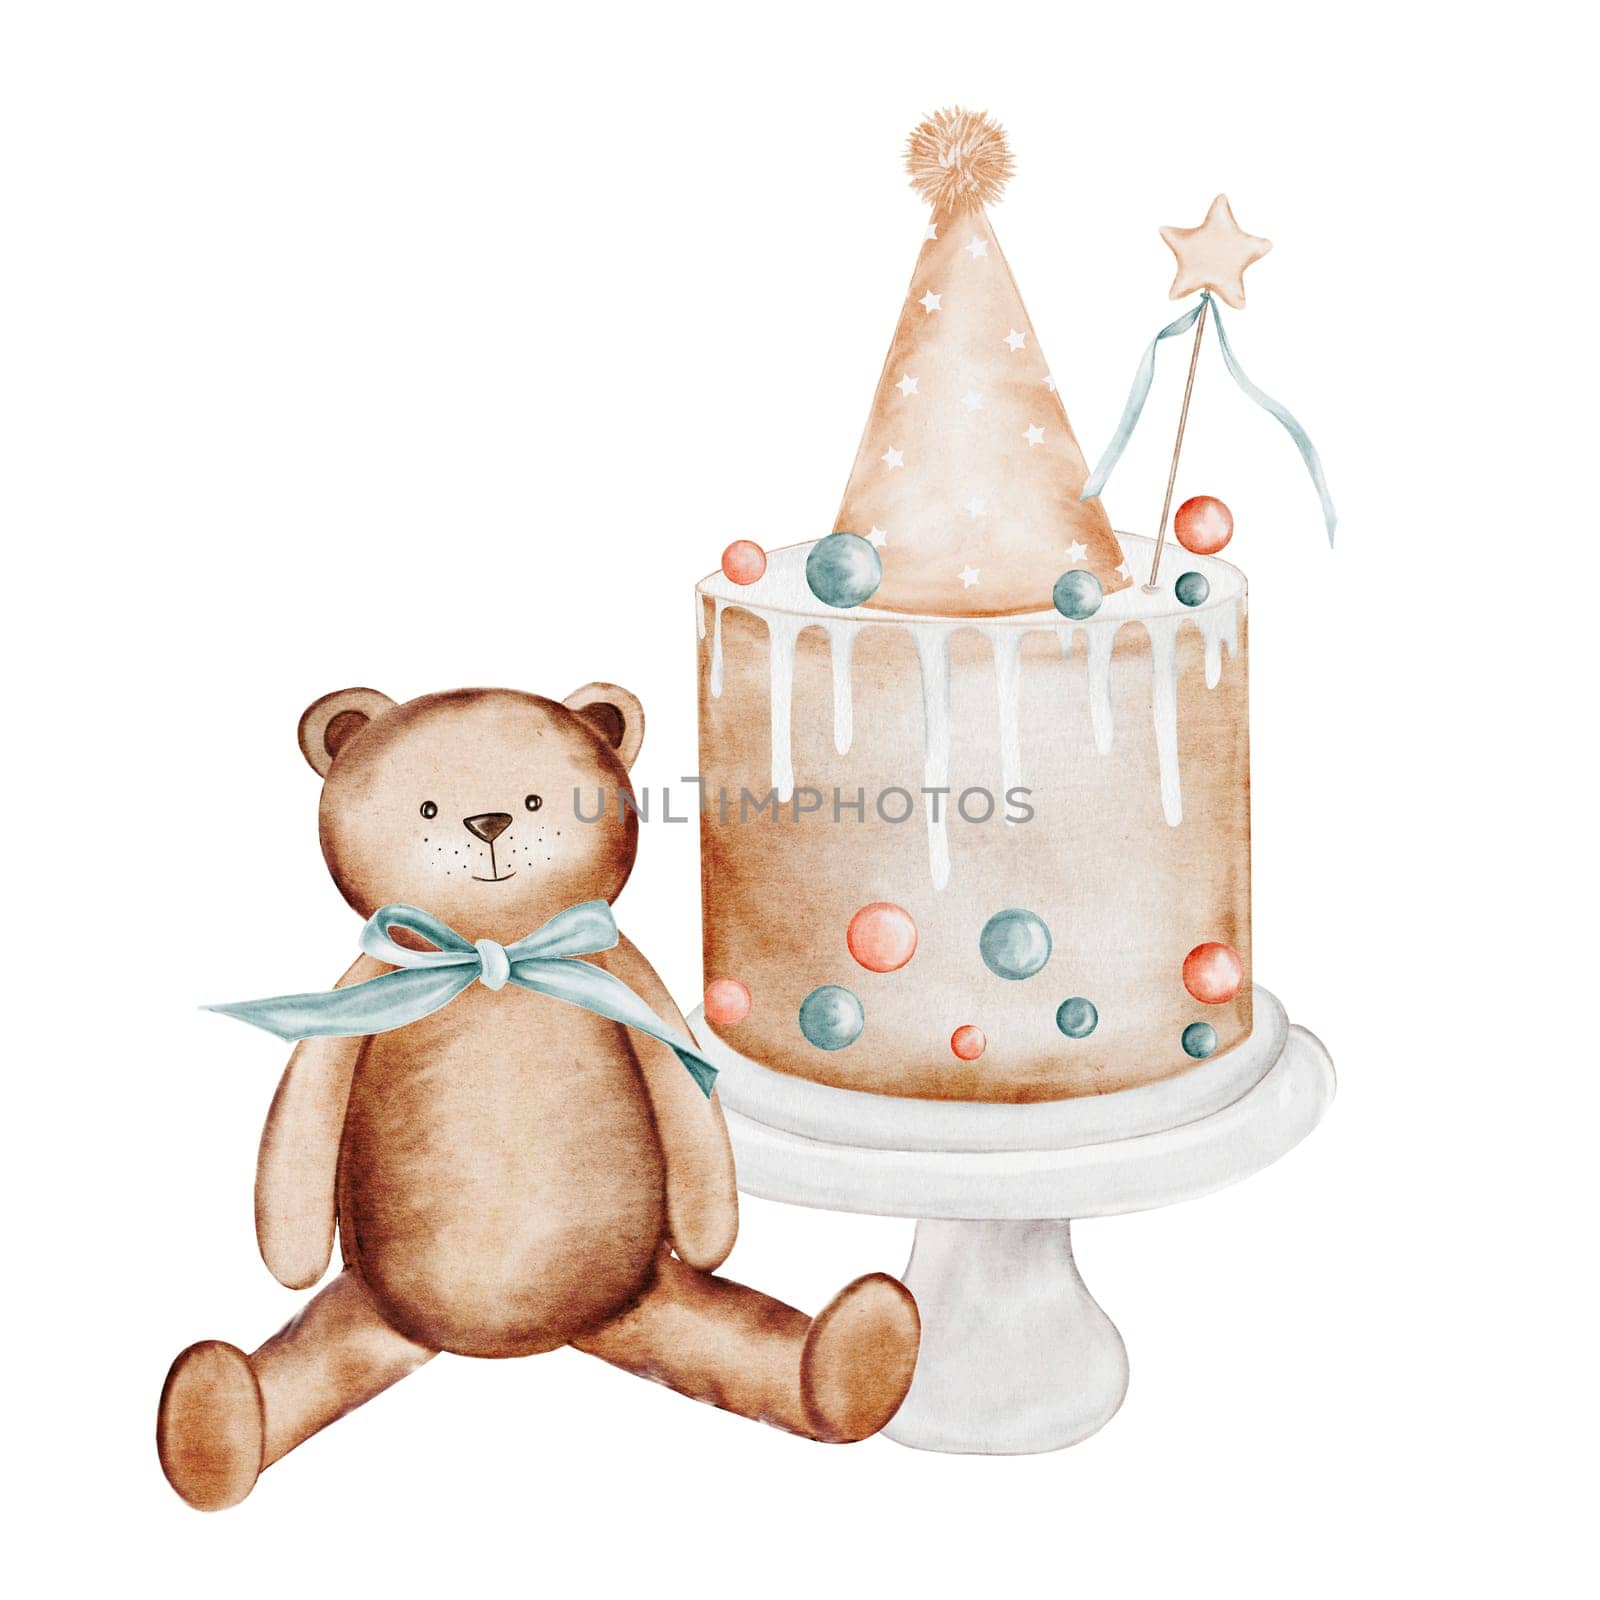 Watercolor birthday drawing. Cute card with cake and teddy bear isolated on white background. Clip art with neutral pastel colors handmade. Ideal for cards and invitations to celebrities and baby showers. High quality illustration